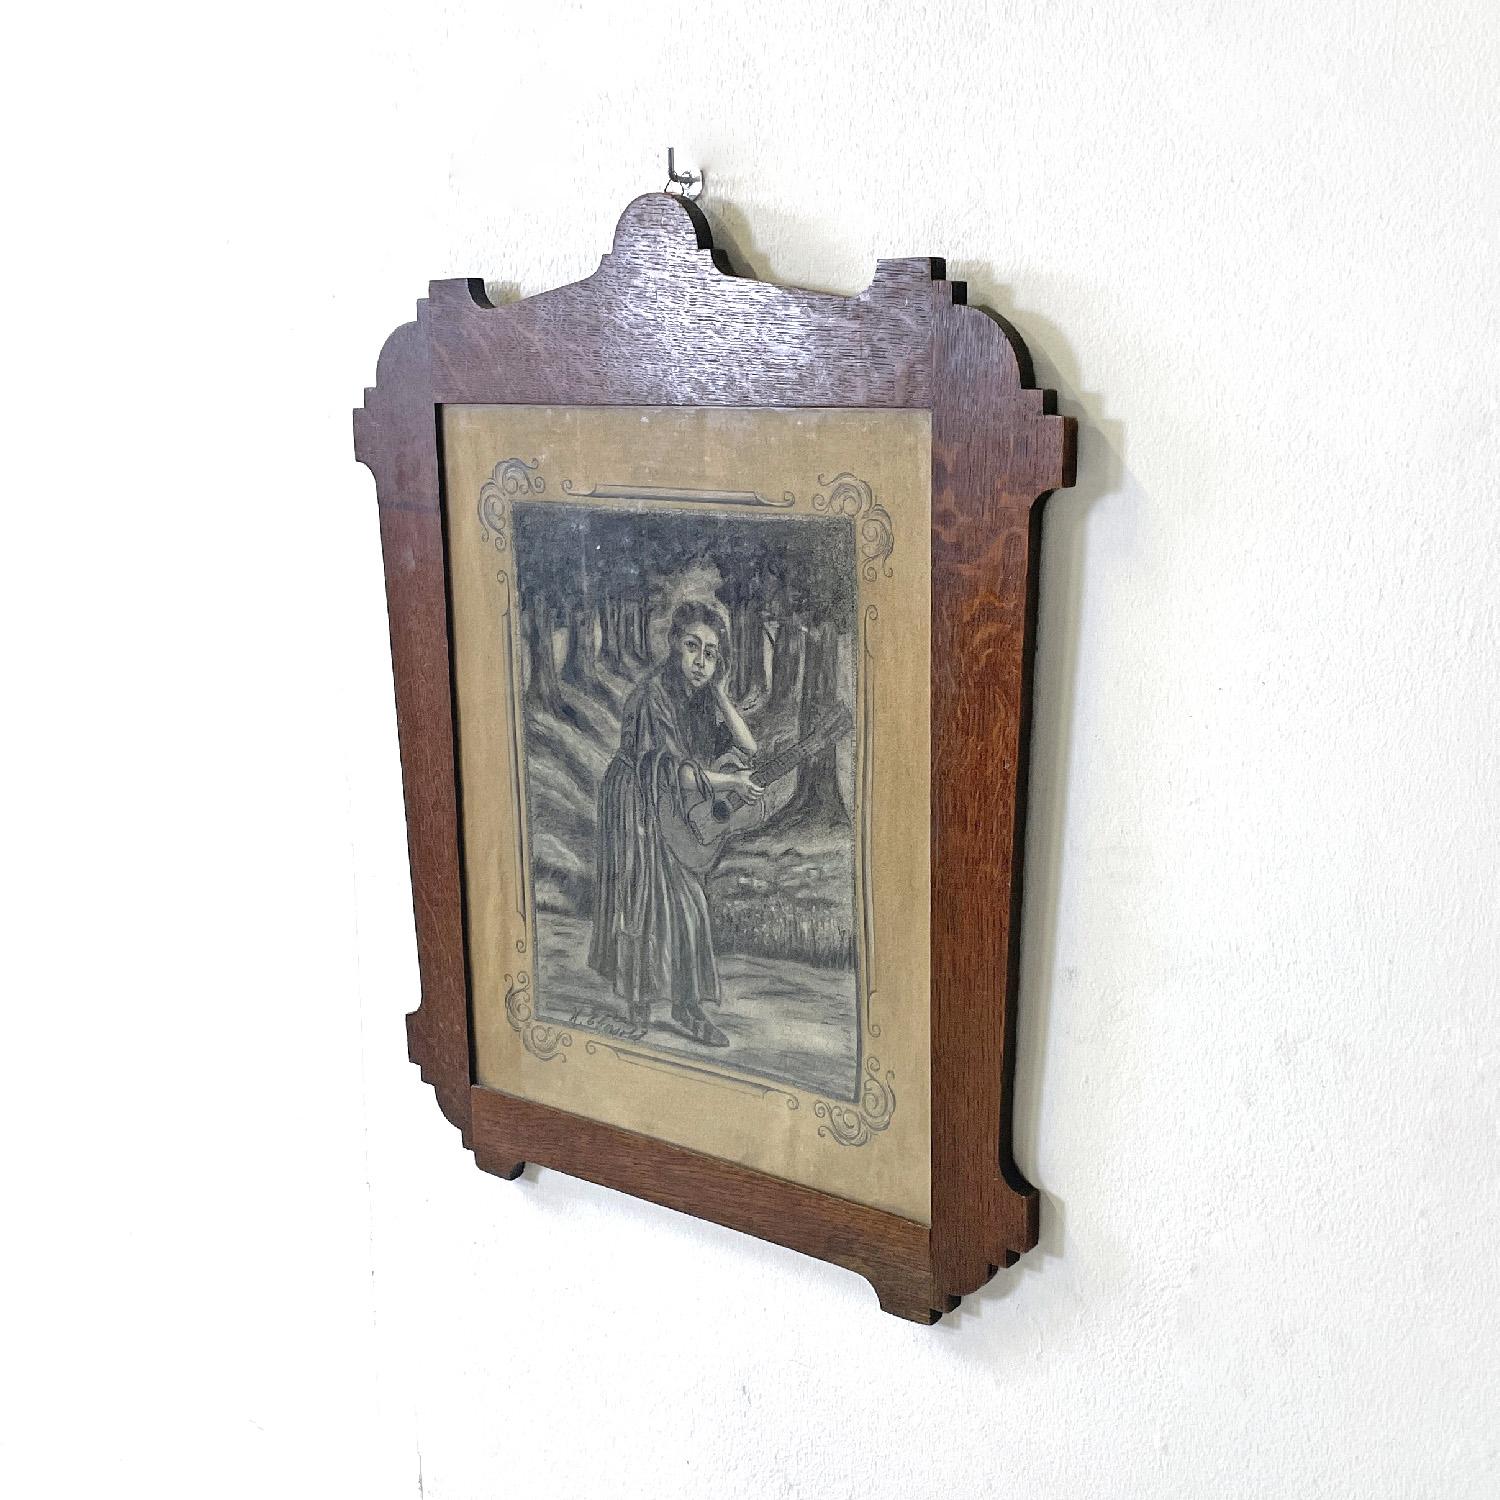 Italian Art Deco charcoal drawing with decorated wooden frame, 1930s
Painting with charcoal drawing and wooden frame. The drawing represents a girl playing the guitar in a forest, the drawing is enriched on the sides and corners by decorations and